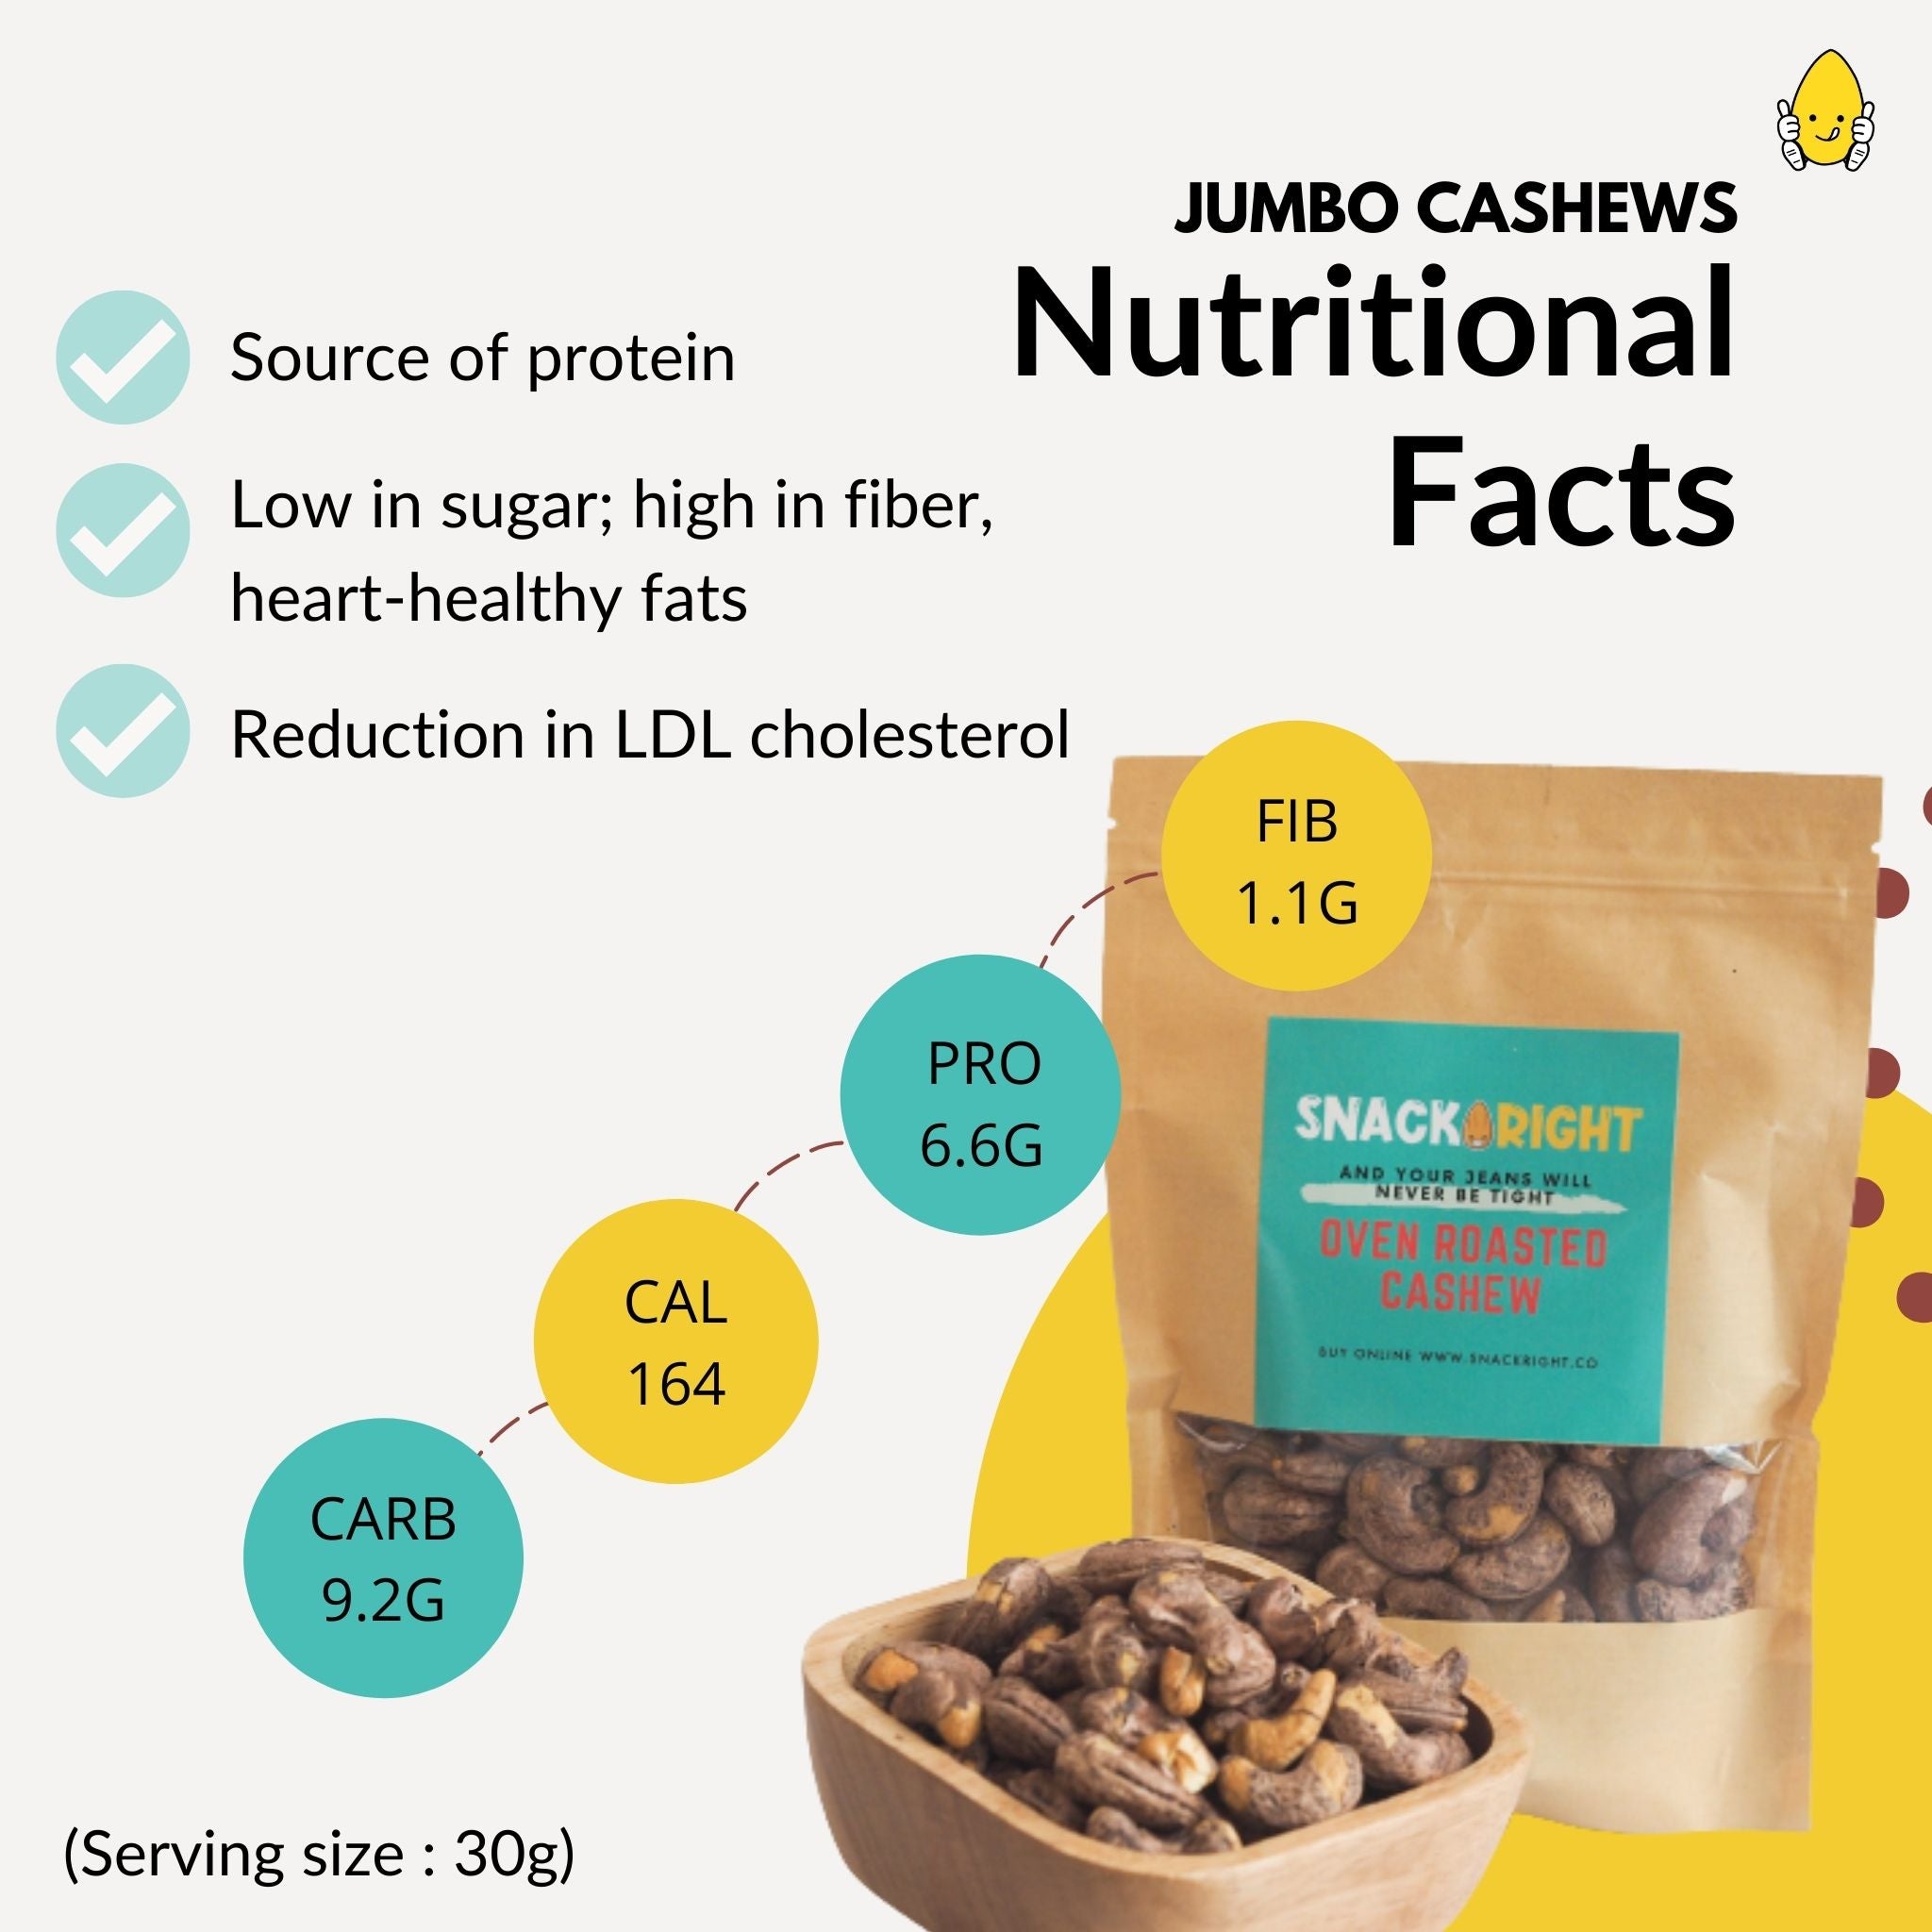 Benefits and nutritional facts of oven roasted jumbo cashews